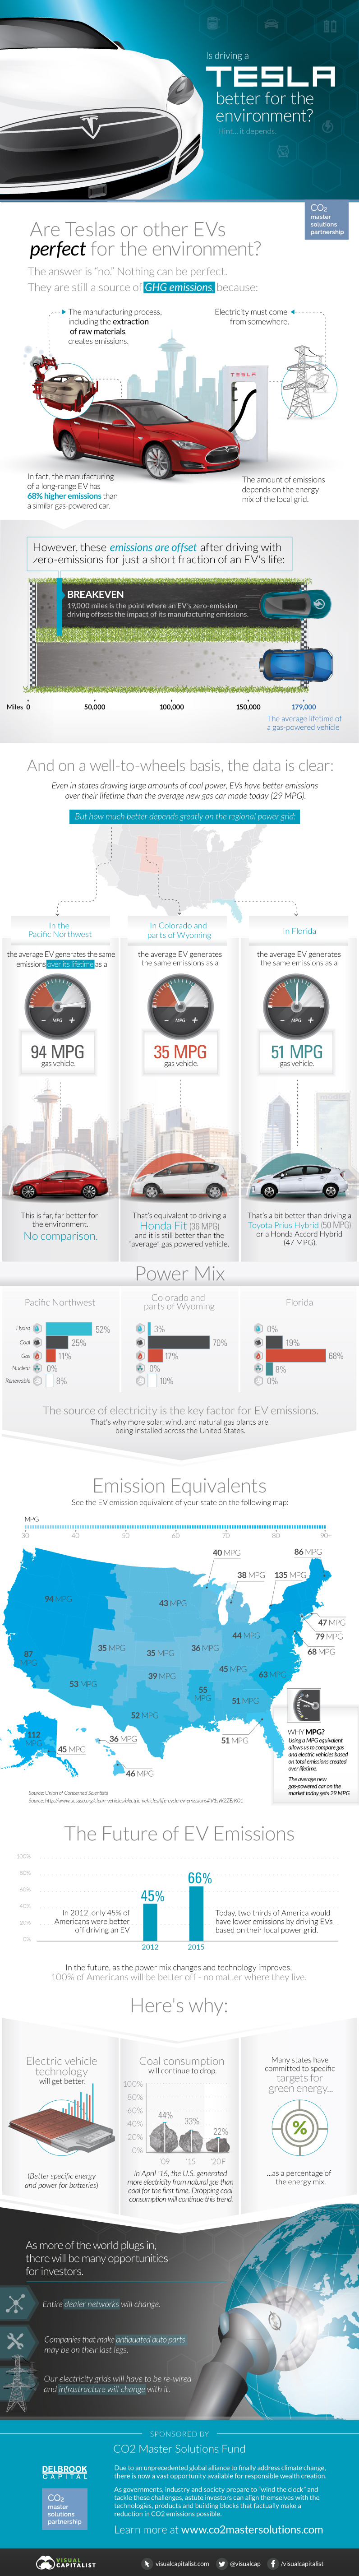 Is Driving a Tesla Better for the Environment? It Depends...